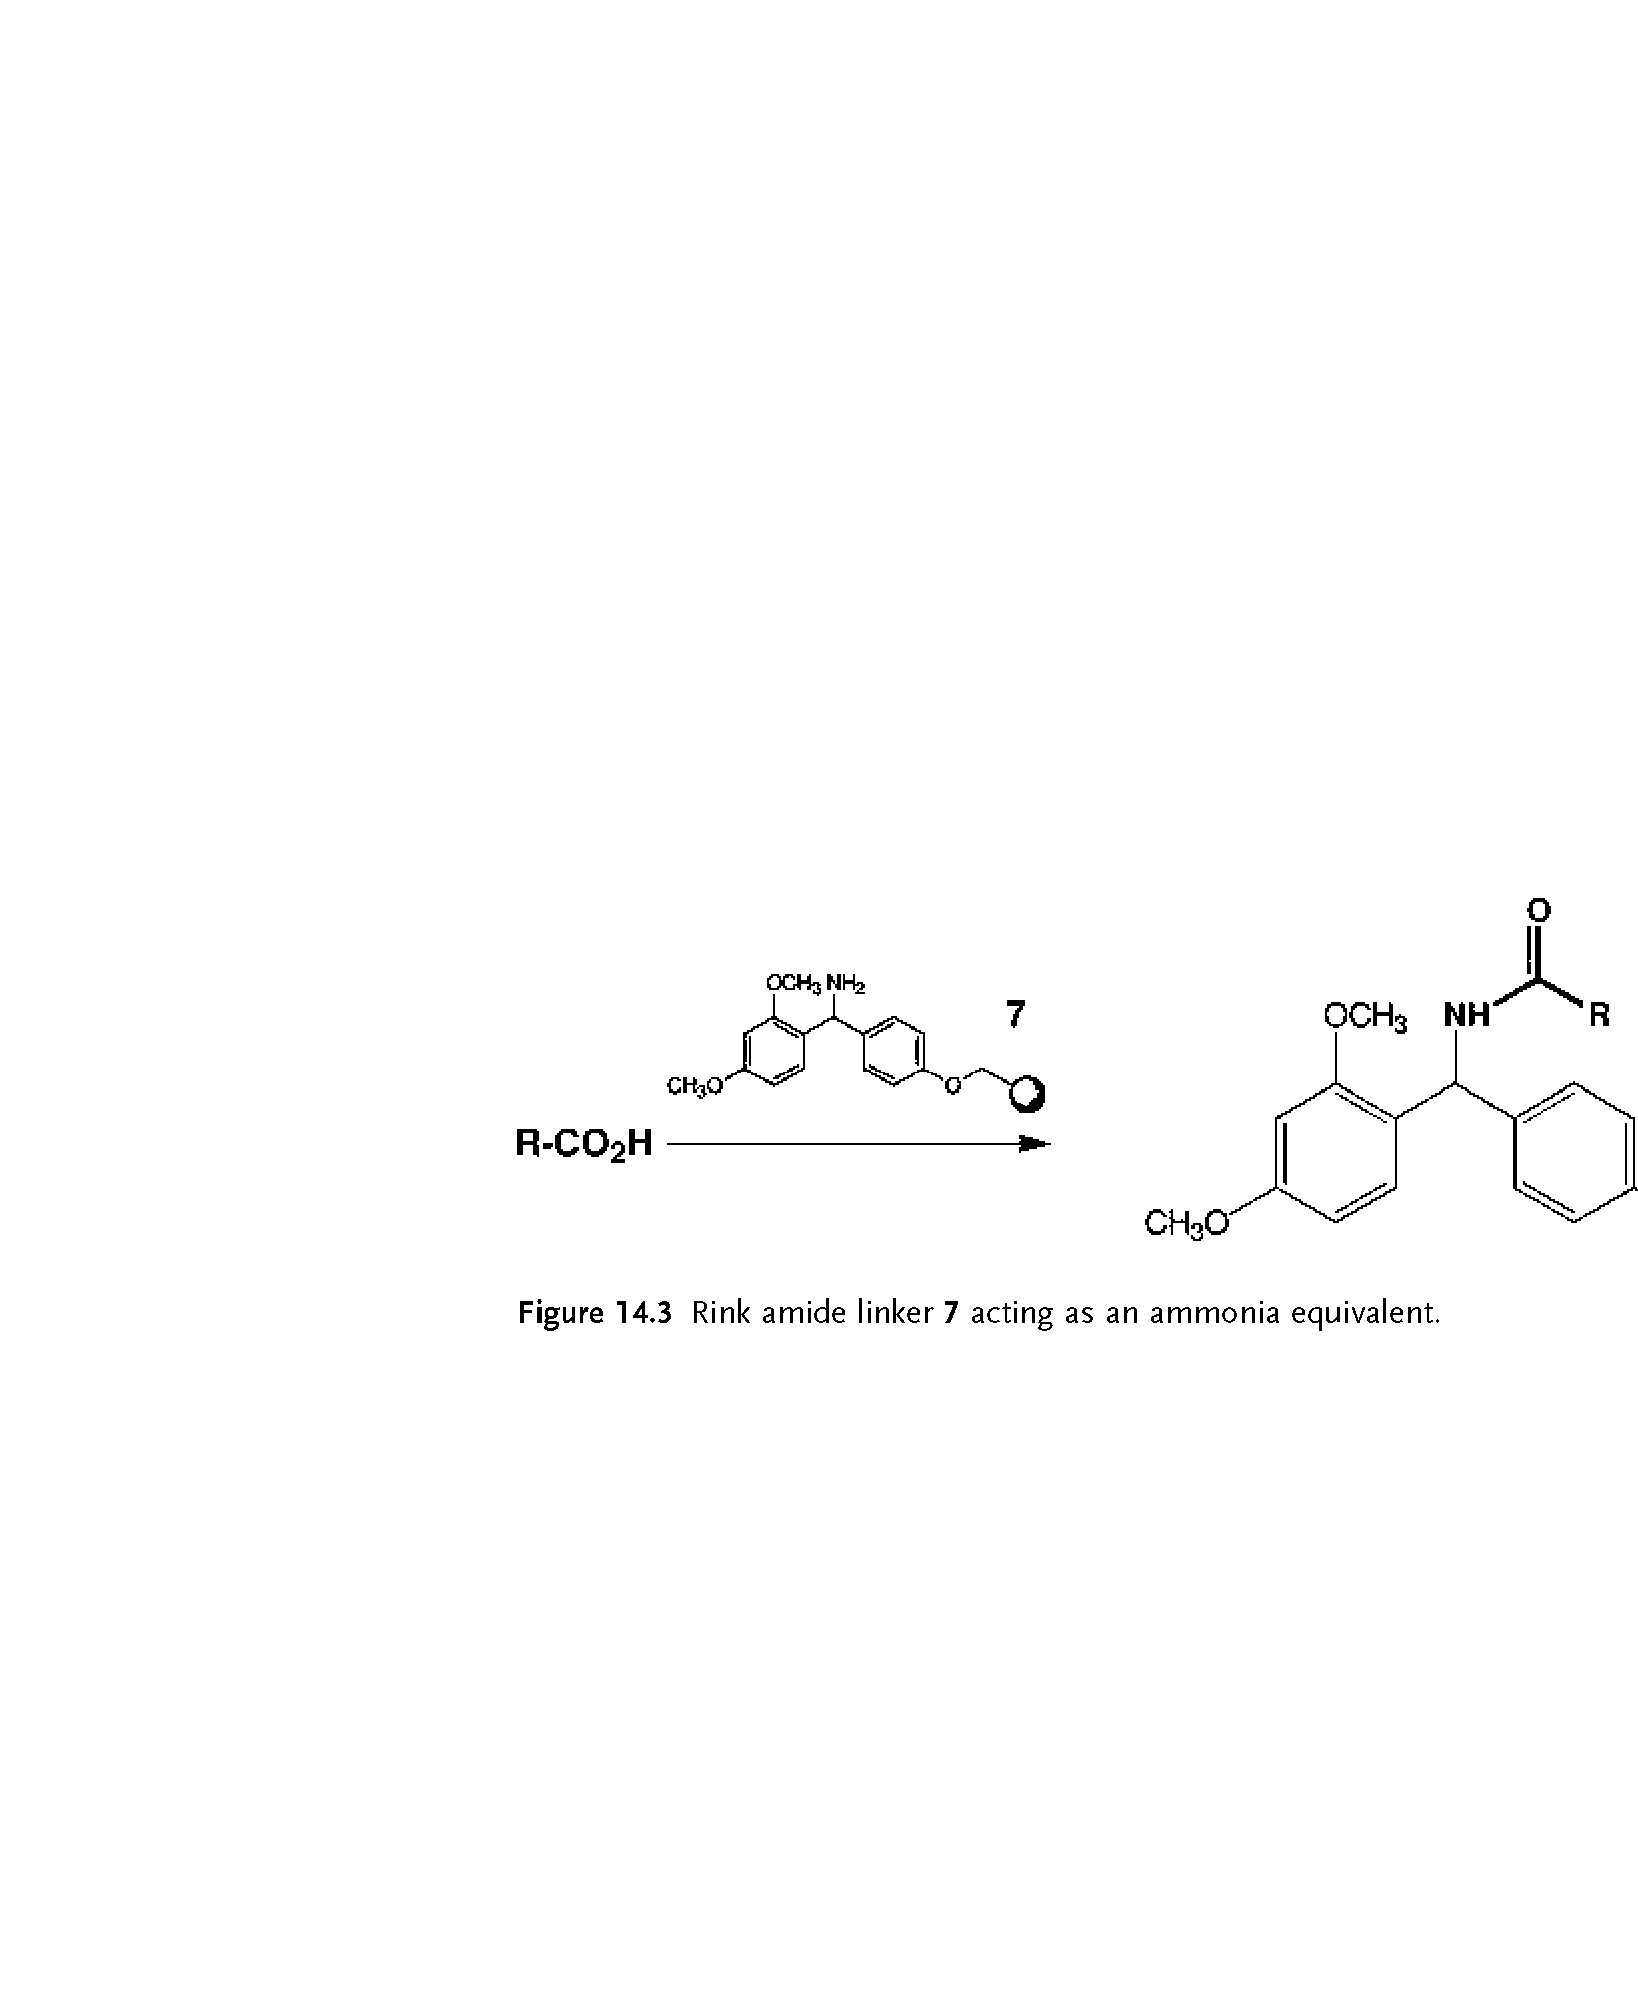 Figure 14.3 Rink amide linker 7 acting as an ammonia equivalent.